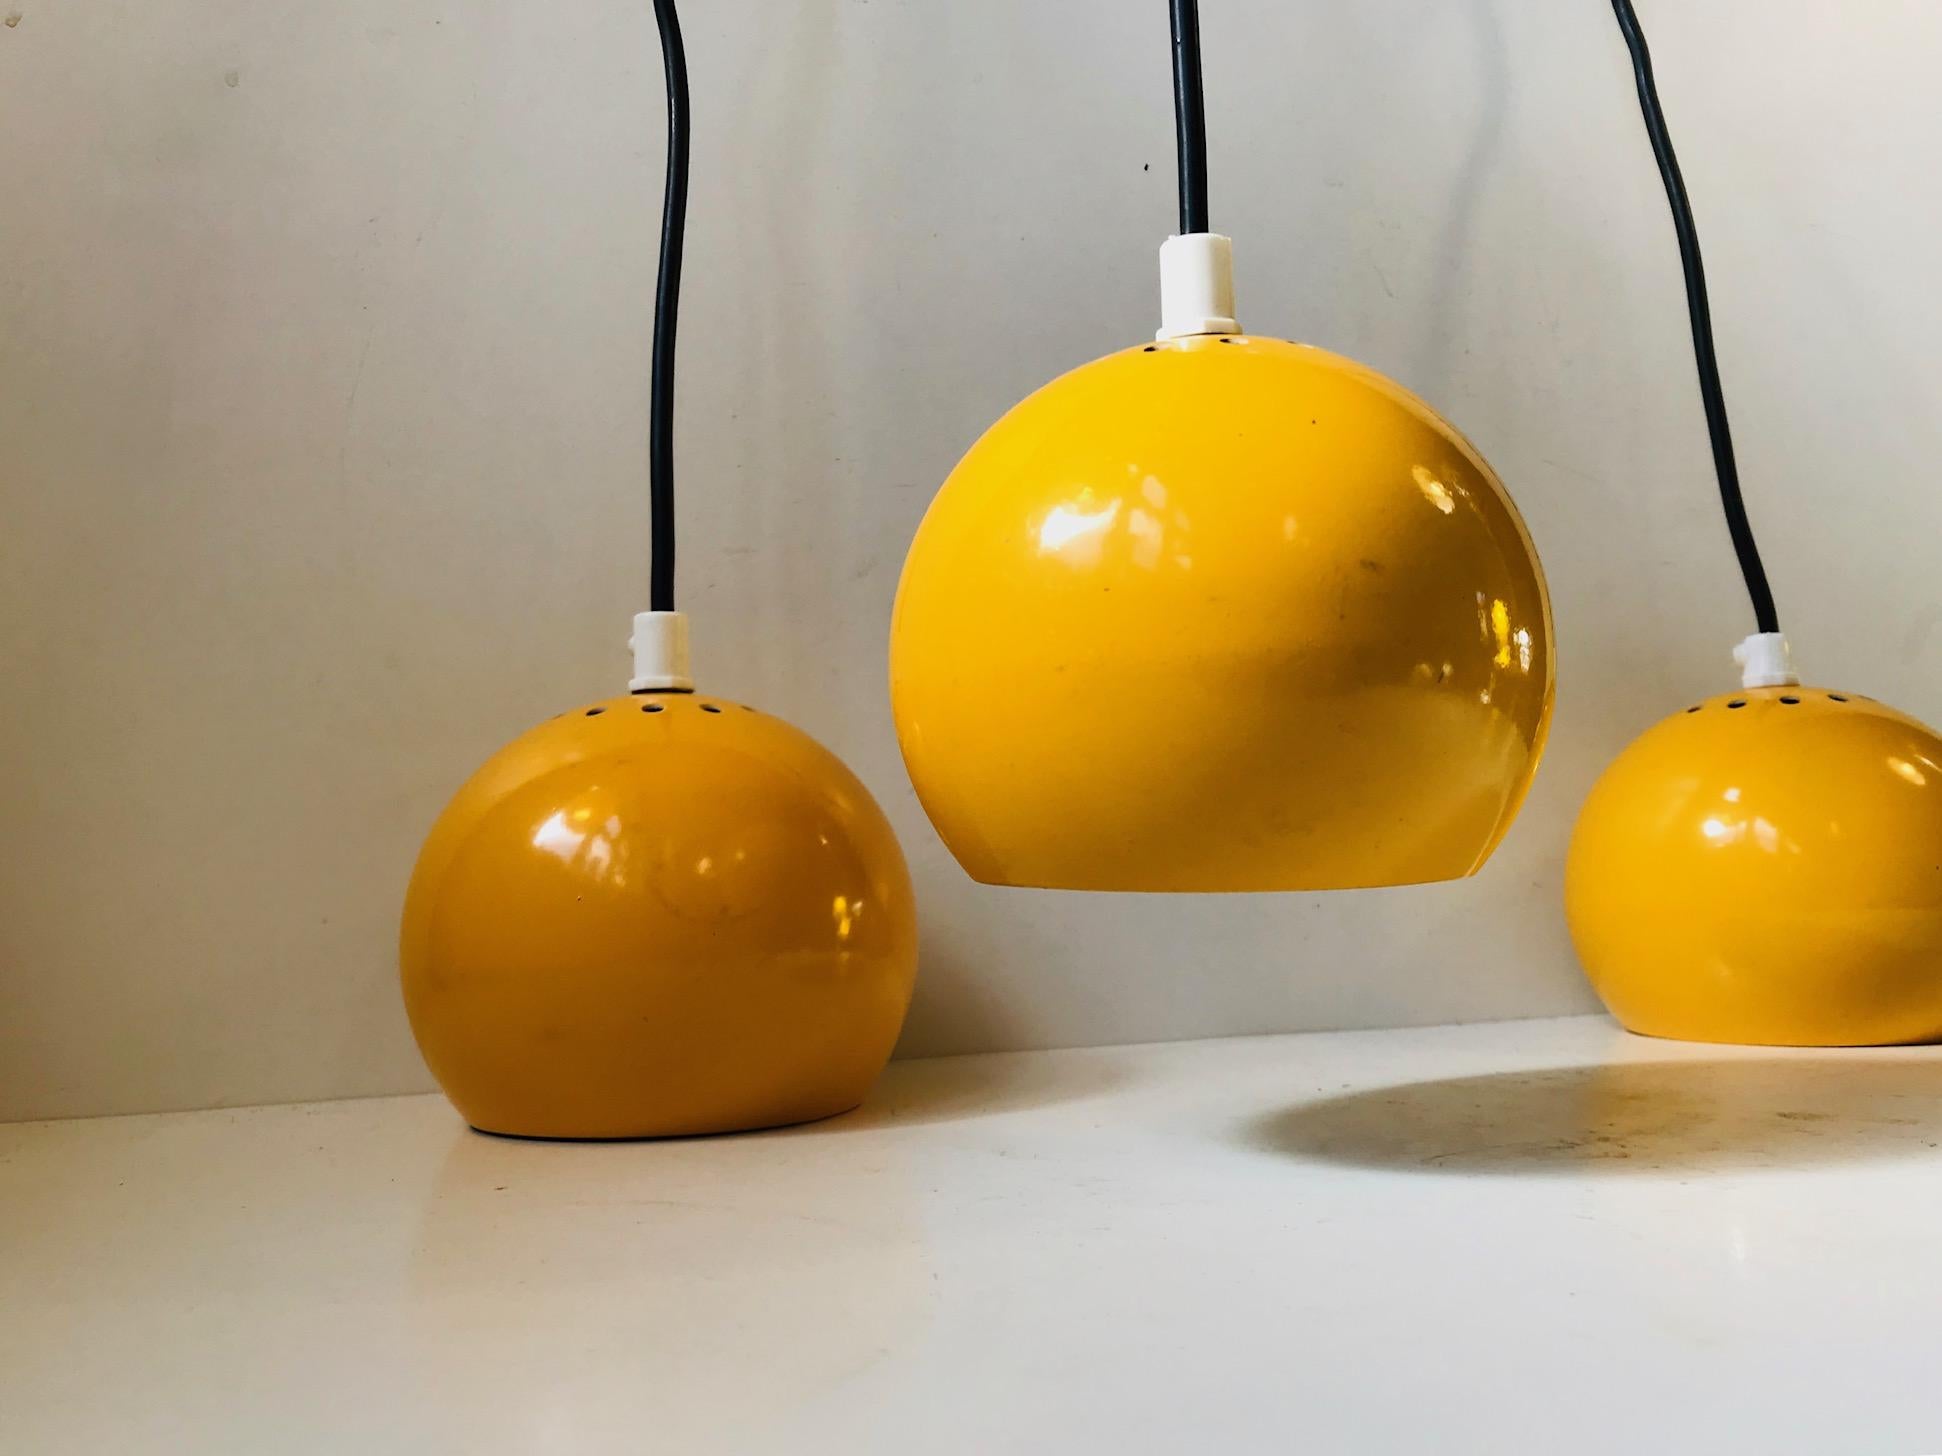 Bundled pendant lamp made from 3 single yellow ball-shaped lampshades. Manufactured and designed by E. S. Horn in Denmark during the 1960s in a style reminiscent of Verner Panton. The 3 lights can be used separately and 3 black canopies are included